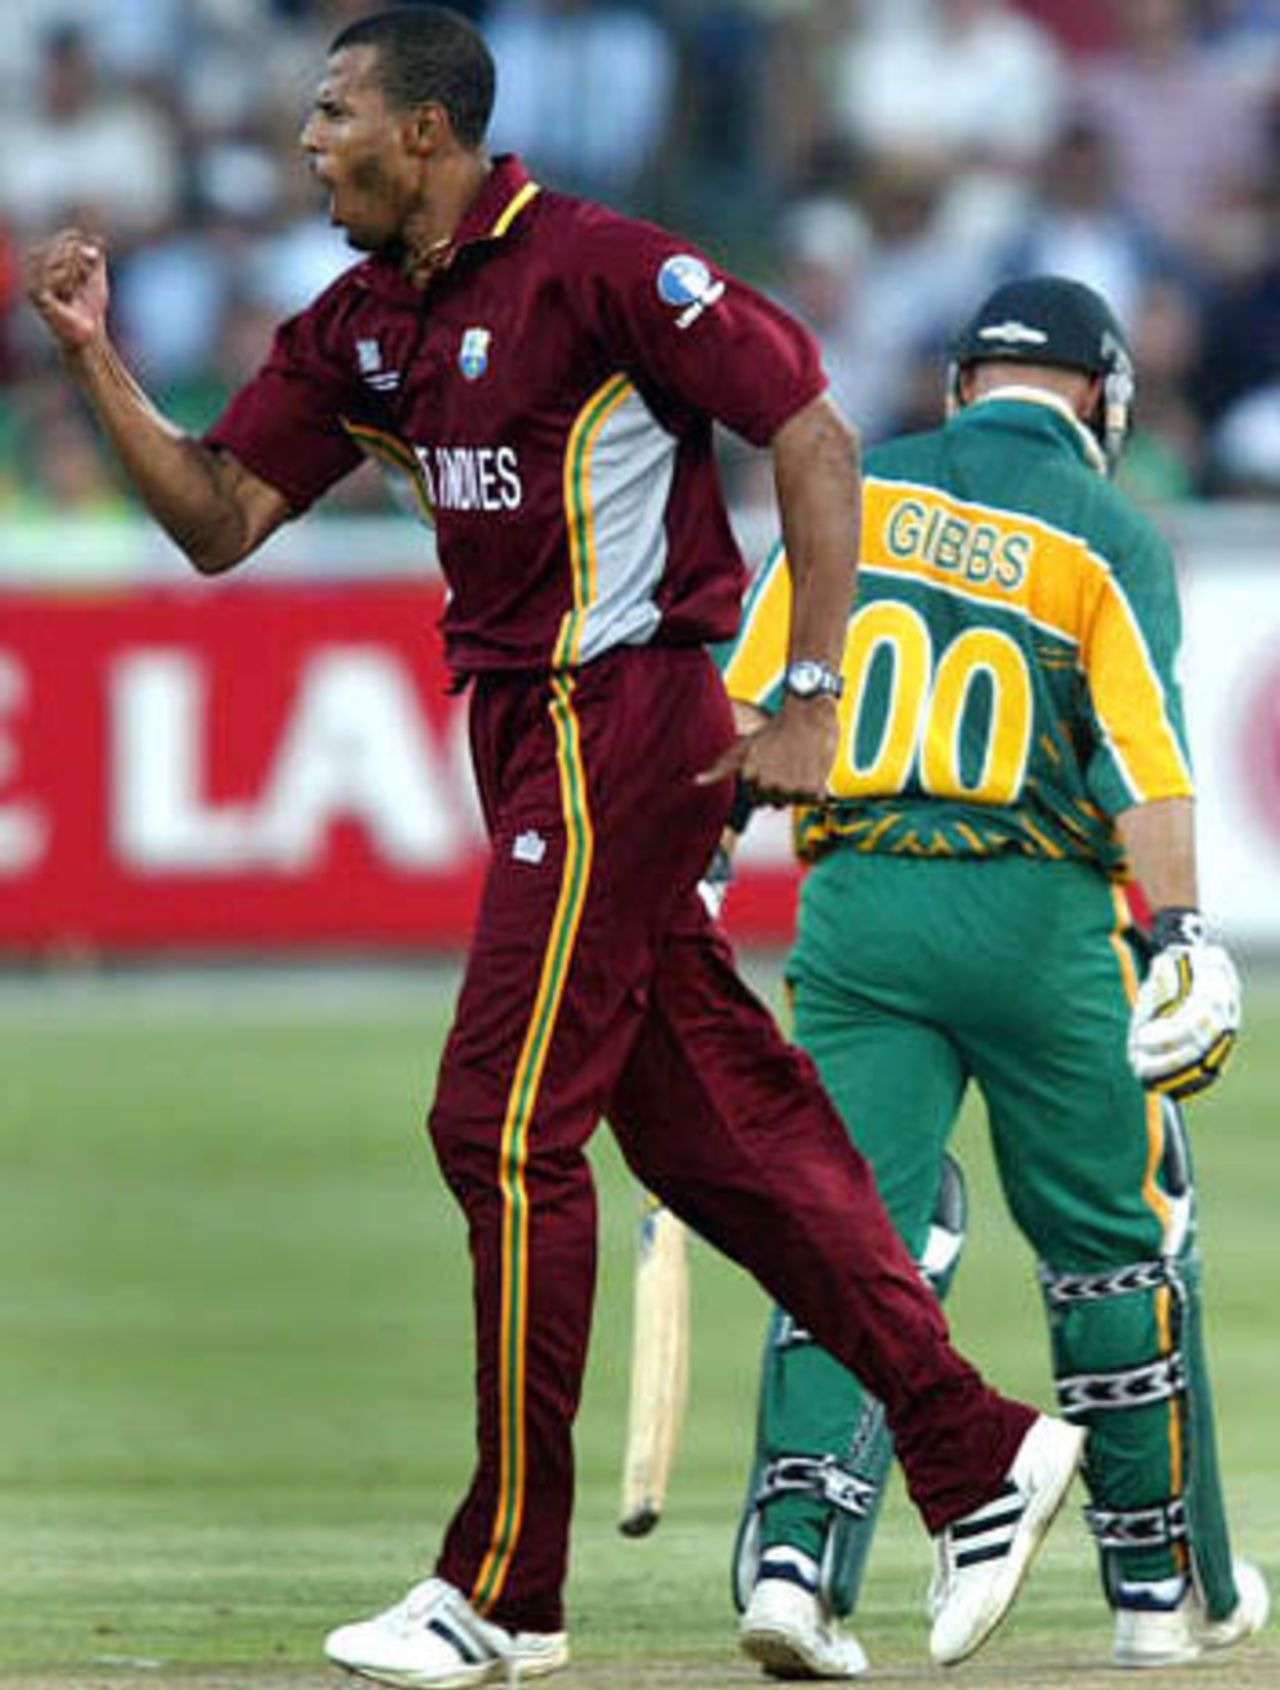 World Cup, 2003 - South Africa v West Indies at Cape Town, 9 Feb 200